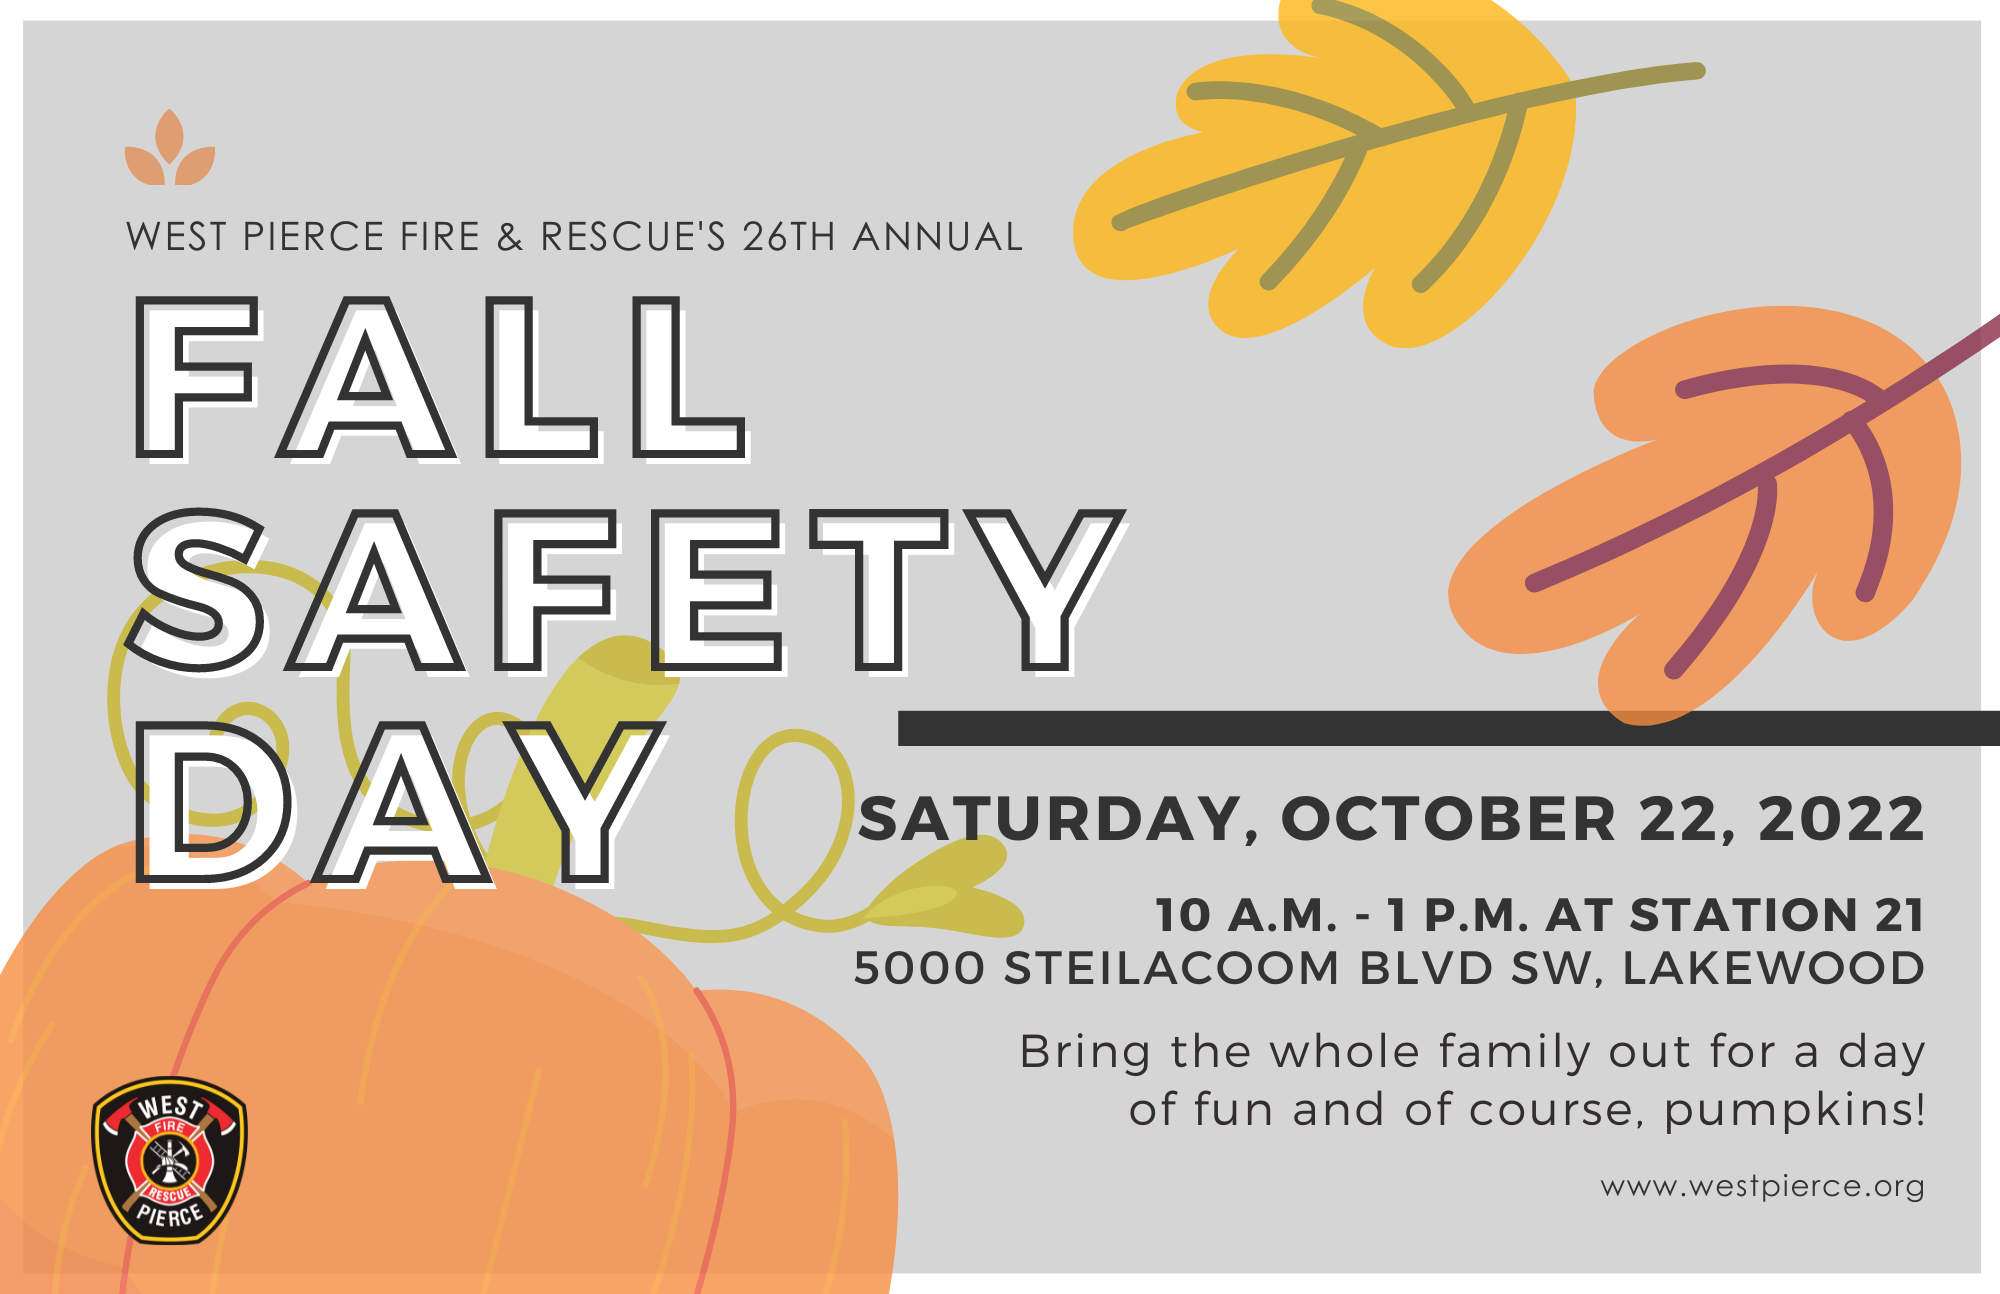 The graphic explains the details for Fall Safety Day 2022. Fall Safety Day will be held on Saturday, october 22, 2022 at 5000 steilacoom boulevard sw in Lakewood, Washington. The event will be held from 10am until 1pm.